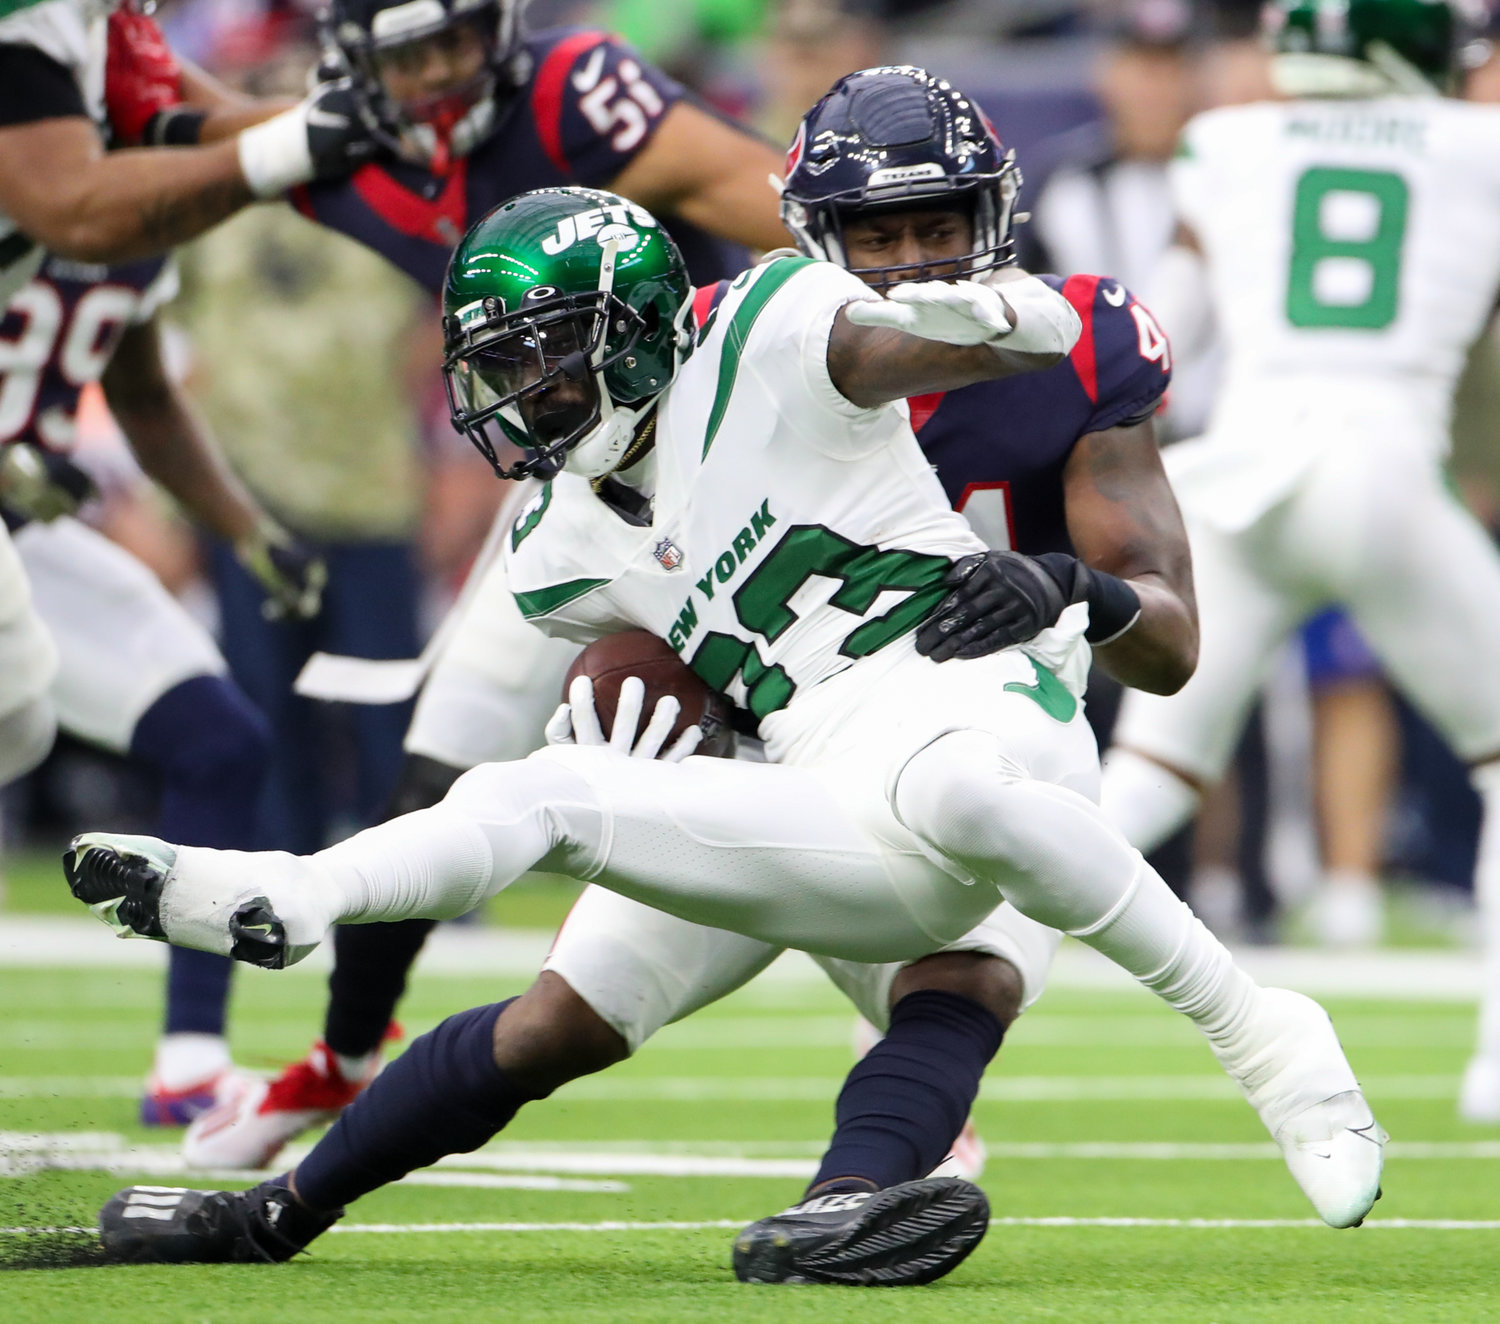 Houston Texans linebacker Zach Cunningham (41) stops New York Jets running back Tevin Coleman (23) for a loss during an NFL game between the Houston Texans and the New York Jets on November 28, 2021 in Houston, Texas. The Jets won, 21-14